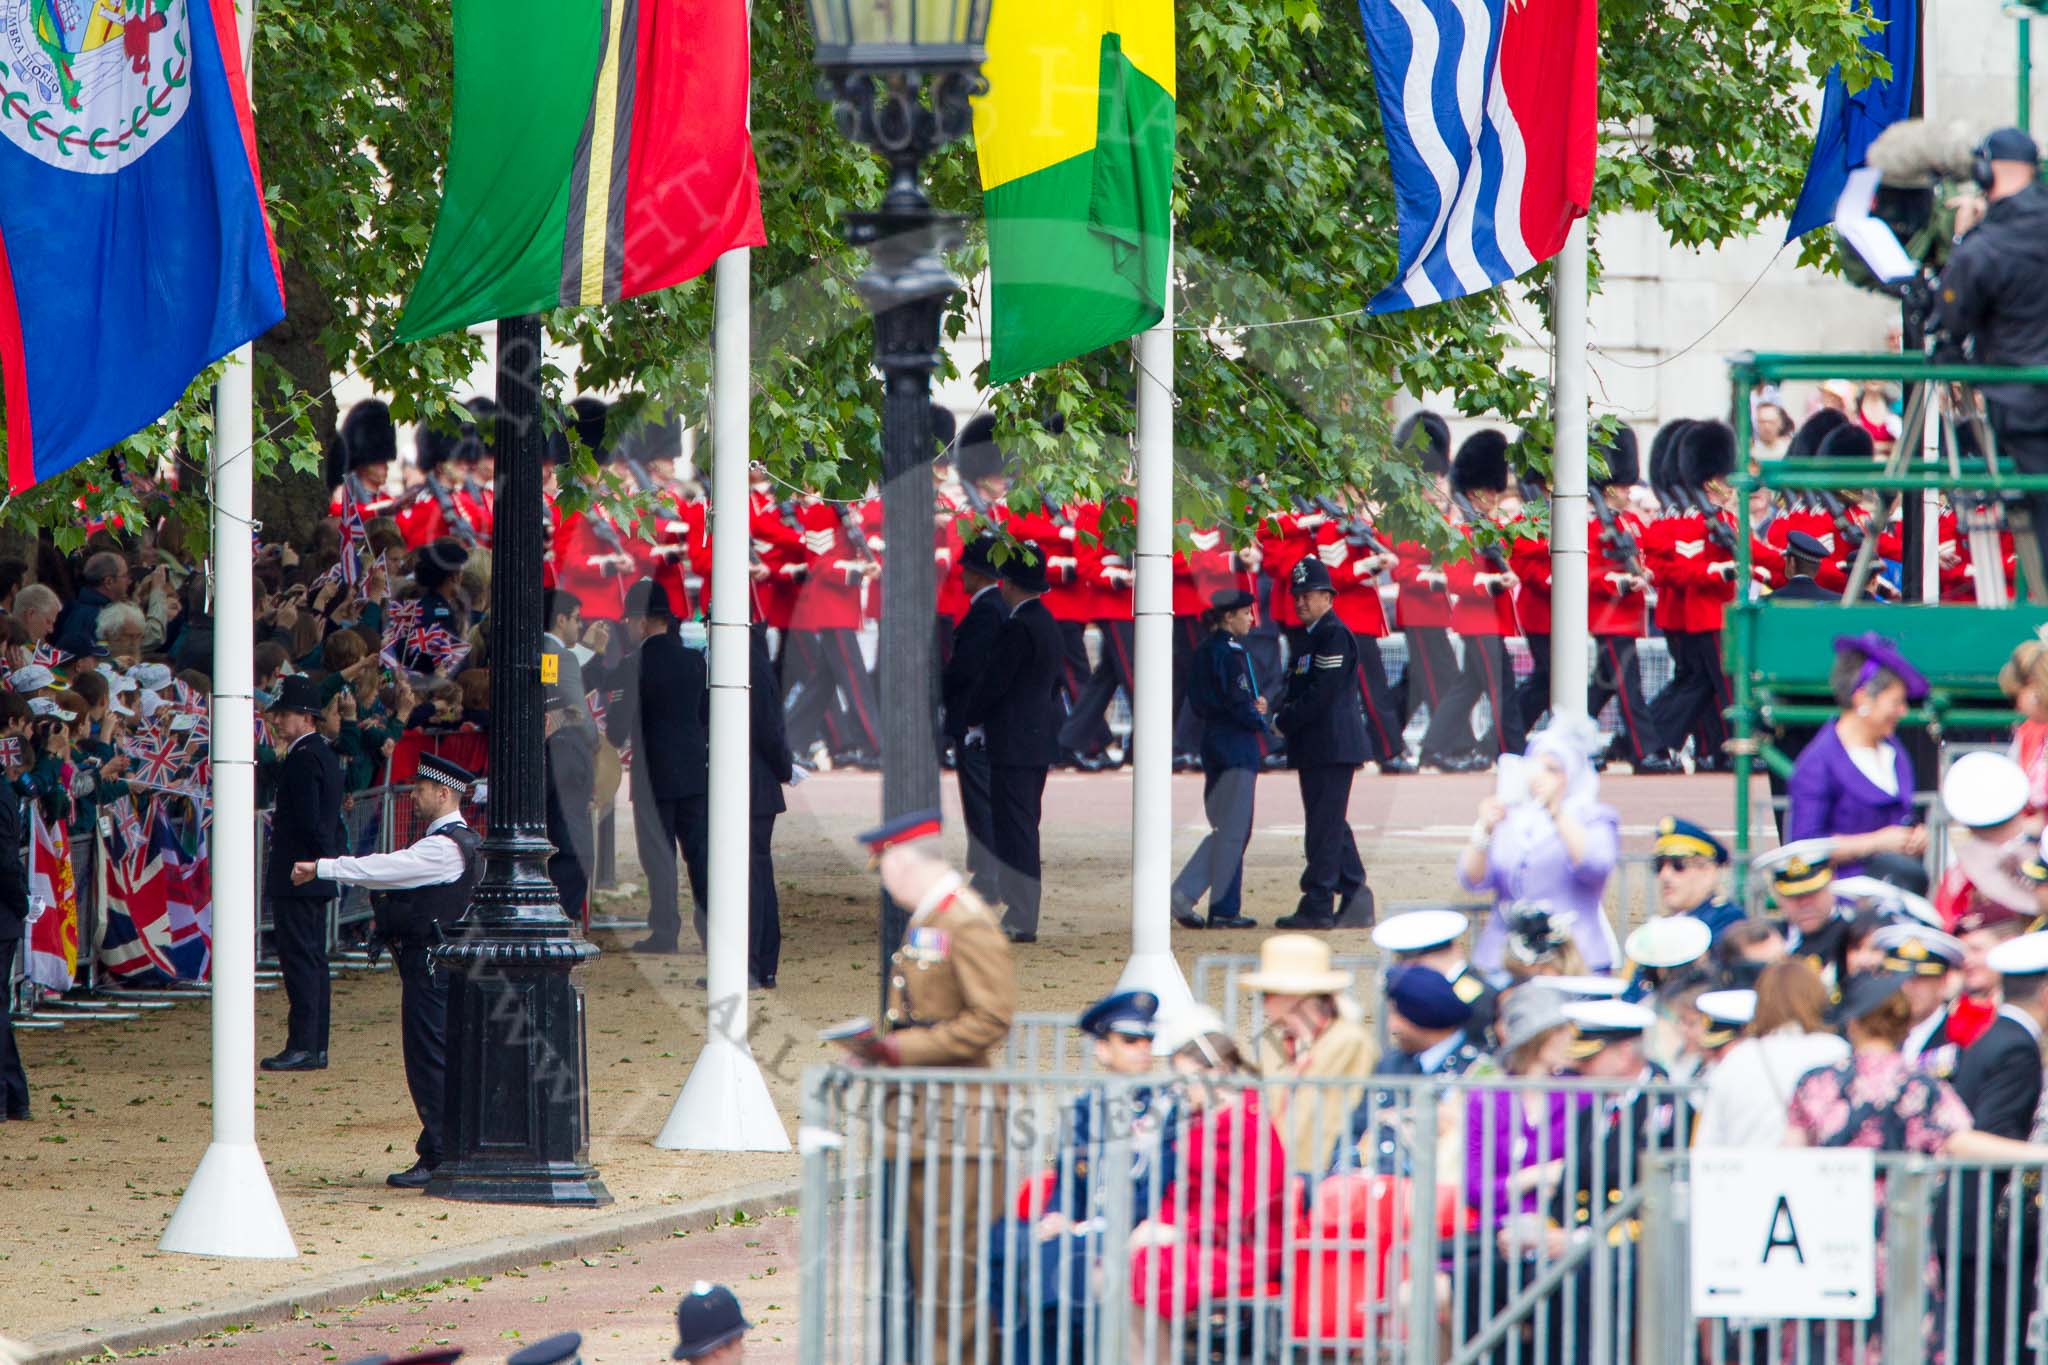 Trooping the Colour 2013: The last of the bands, and the last two guards, can be seen marching on The Mall before turning towards Horse Guards Parade. Image #96, 15 June 2013 10:28 Horse Guards Parade, London, UK